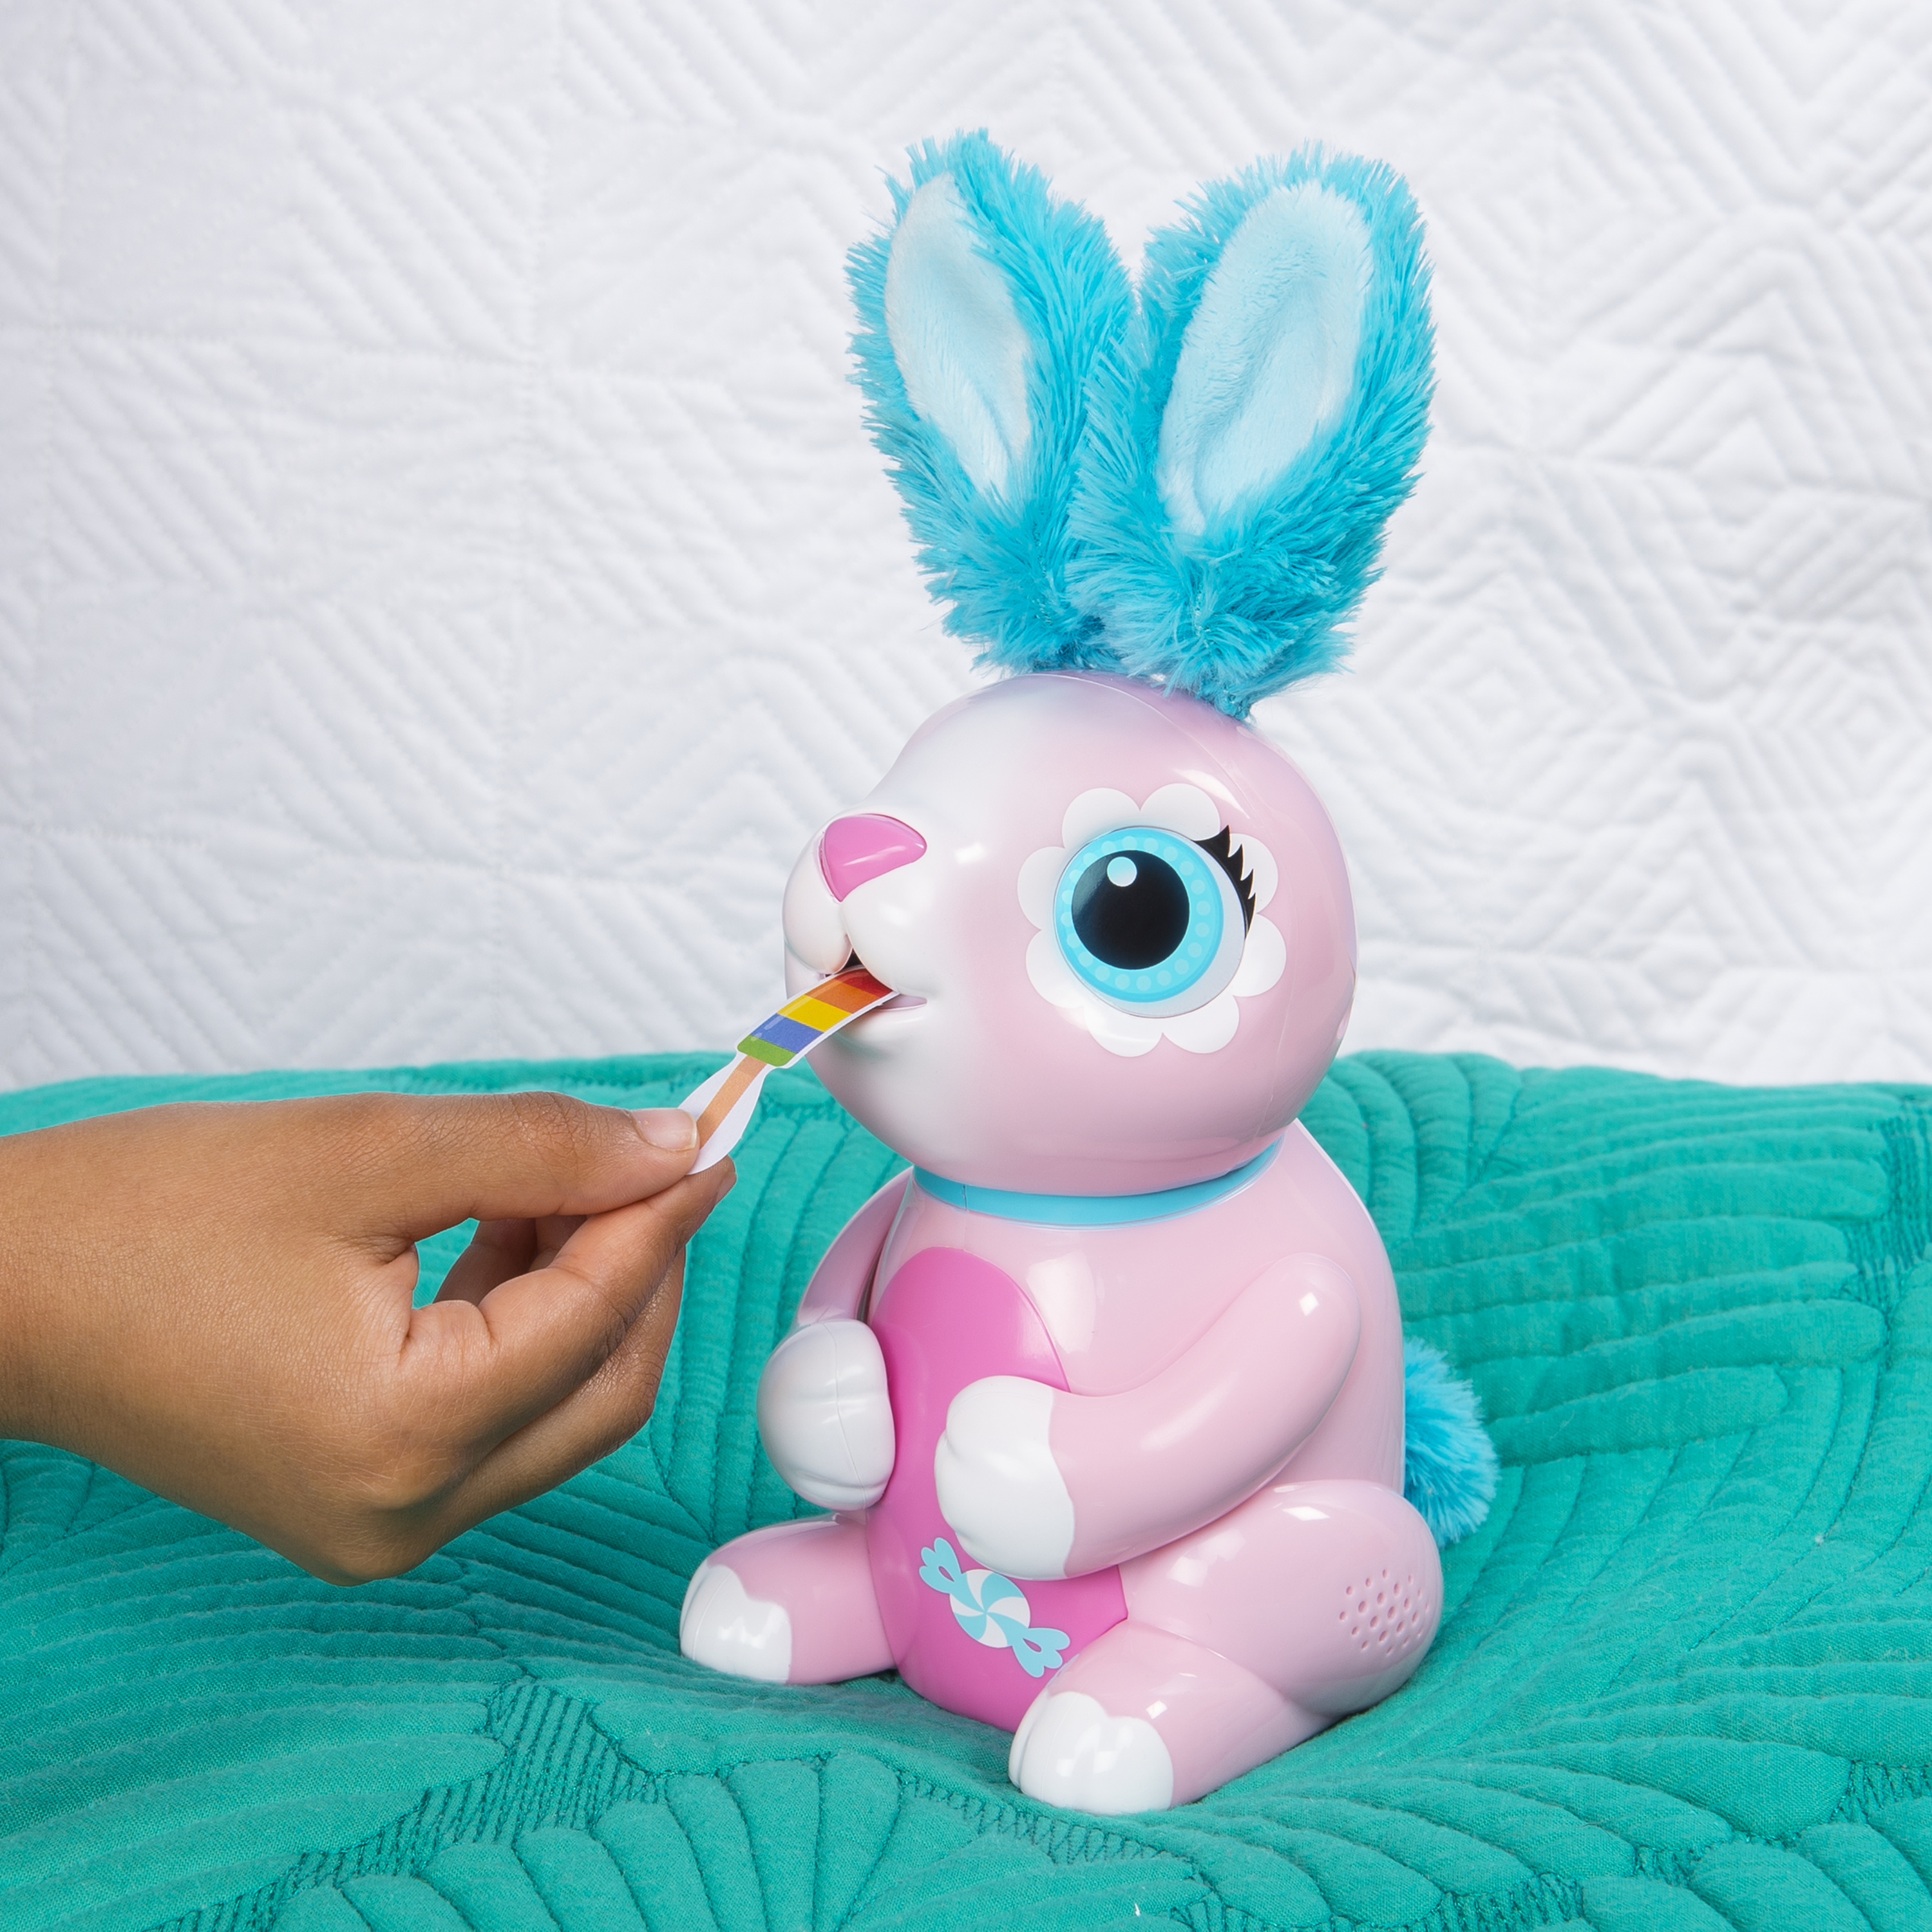 Zoomer - Hungry Bunnies, Shreddy, Interactive Robotic Rabbit that Eats, for Ages 5 and Up - image 6 of 8